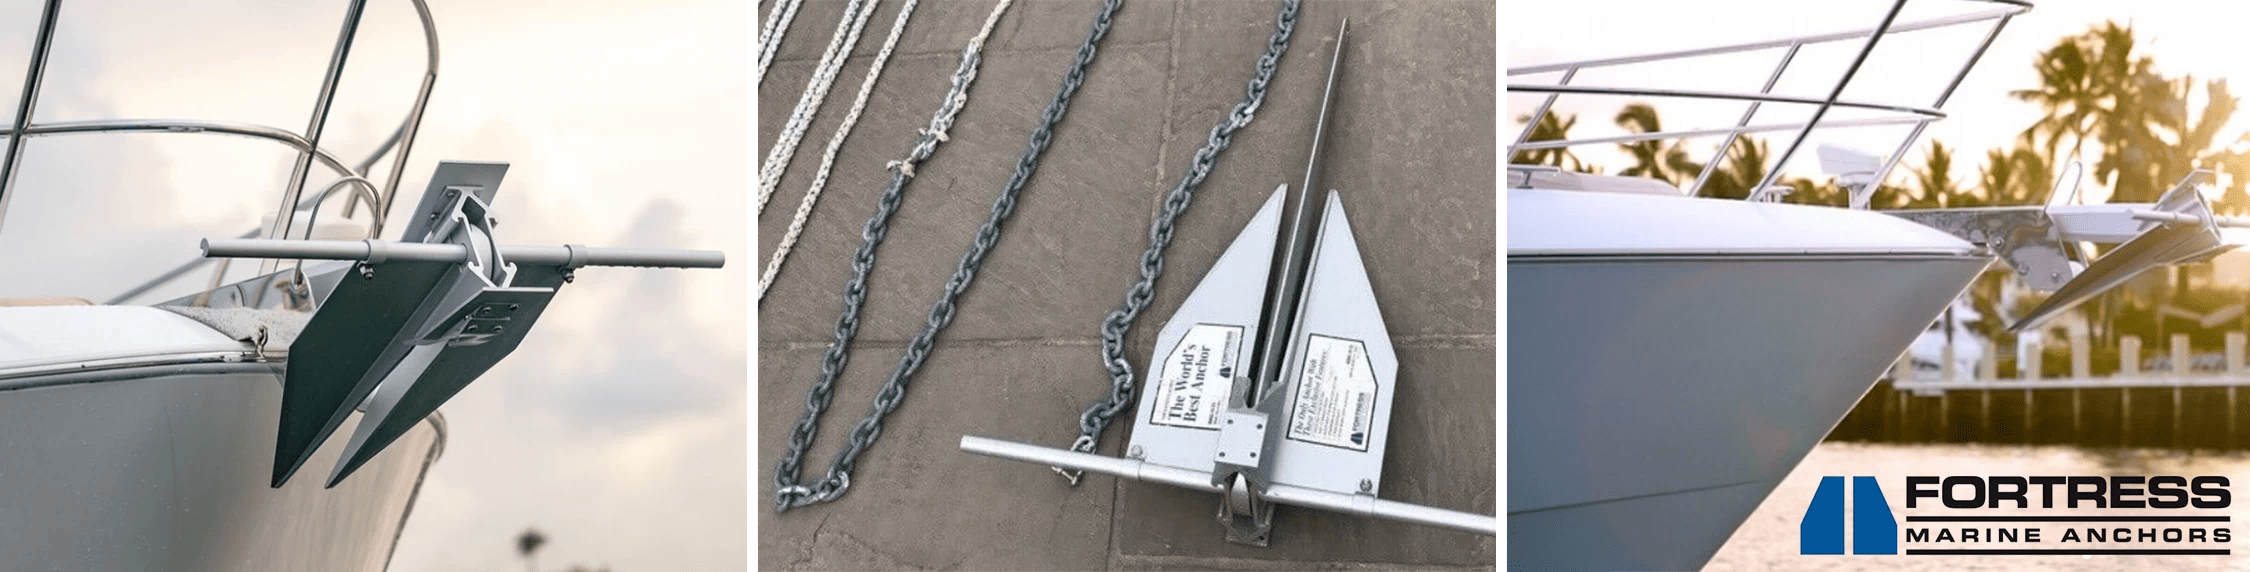 Fortress Anchors | Fortress Marine Anchors | CITIMARINE STORE